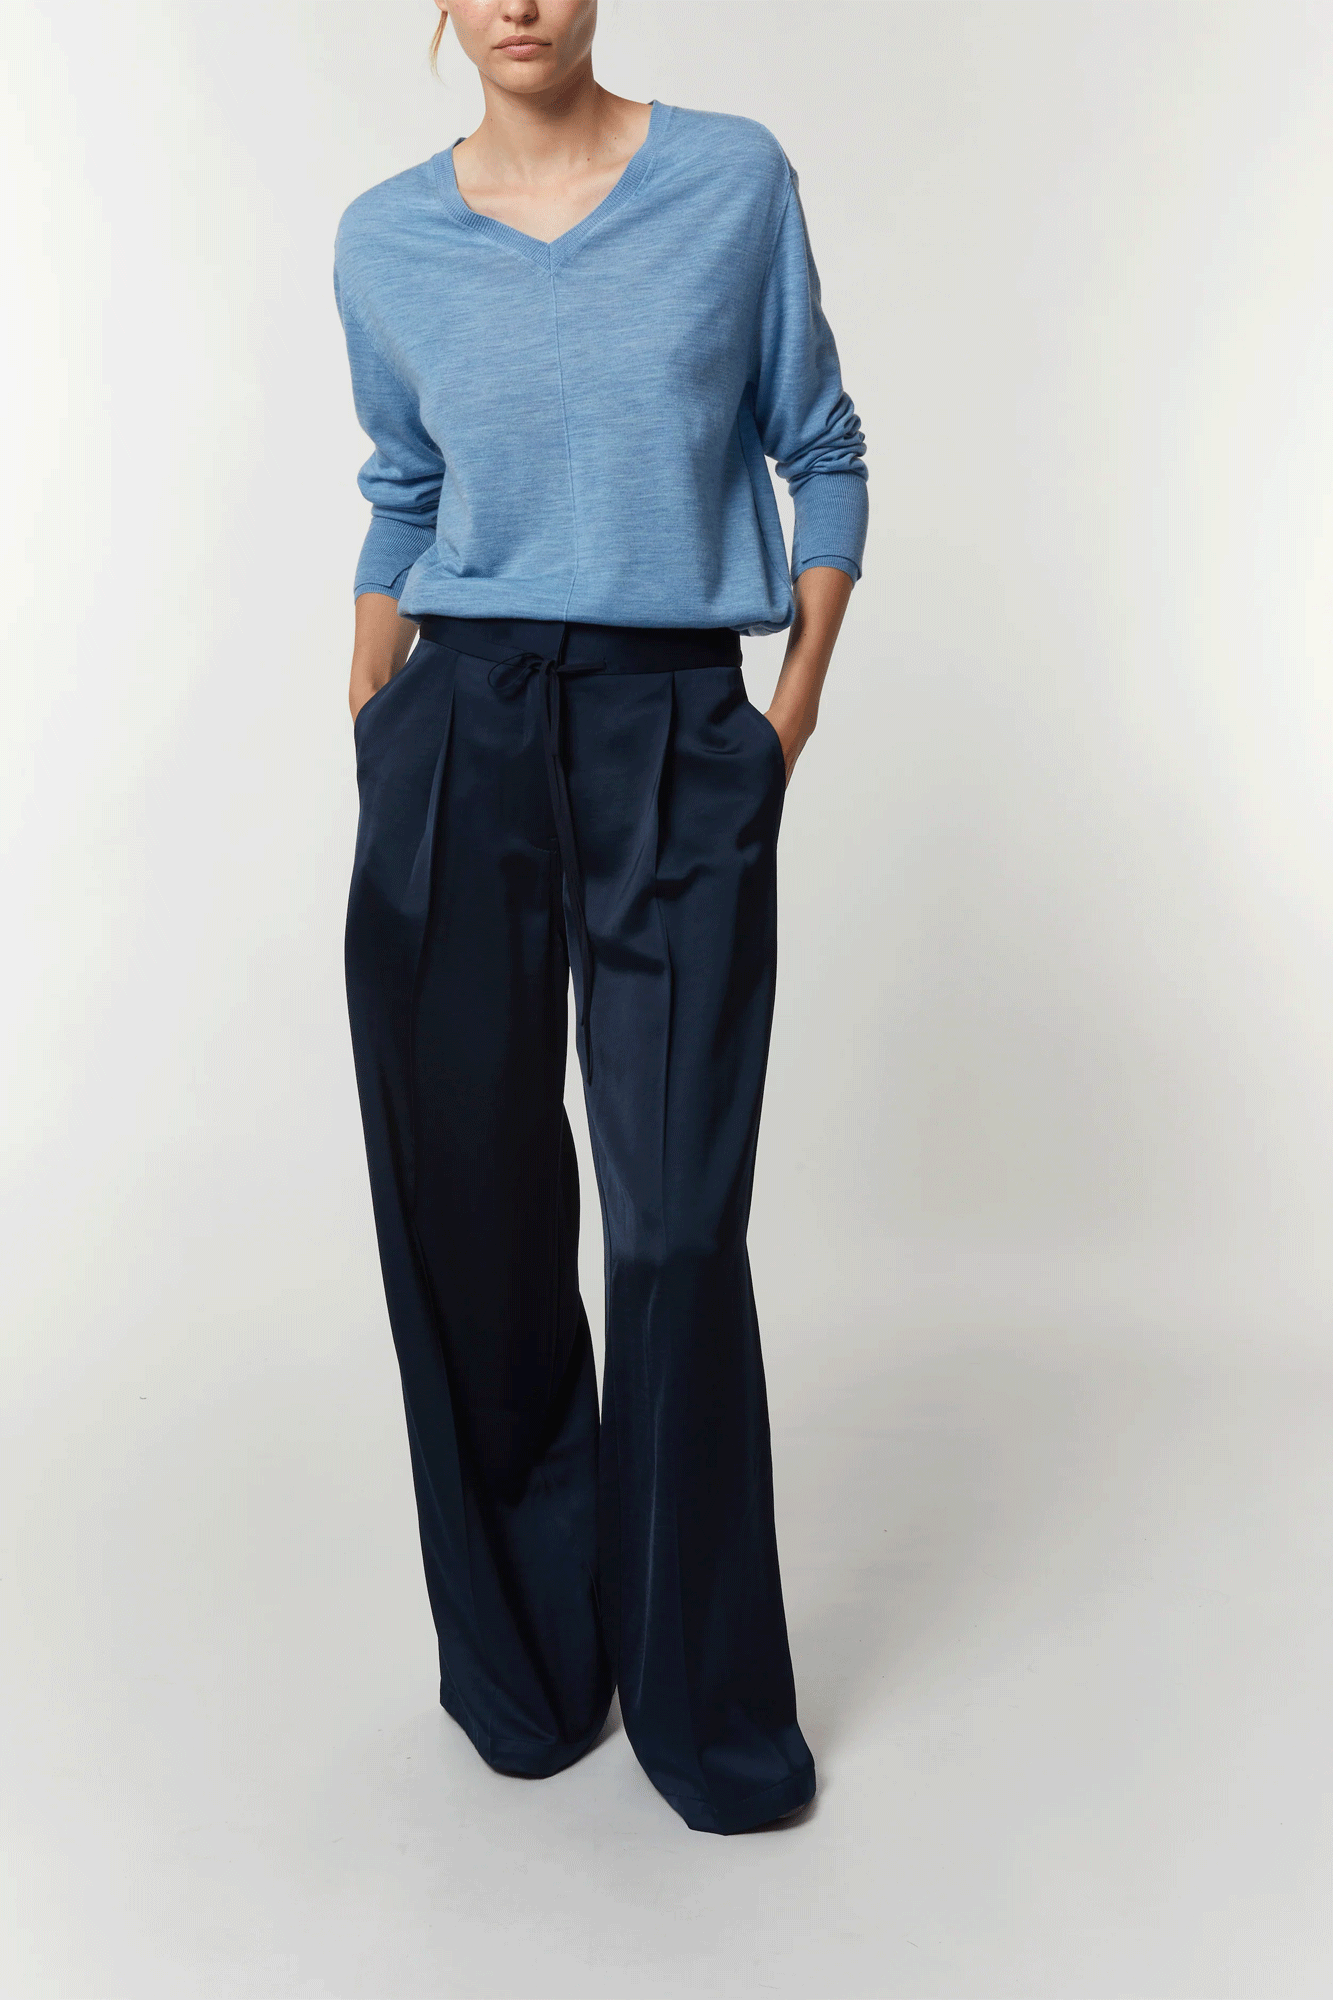 Our Neve Mid-Waisted Wideleg Trouser is the perfect combination of sophistication and comfort.